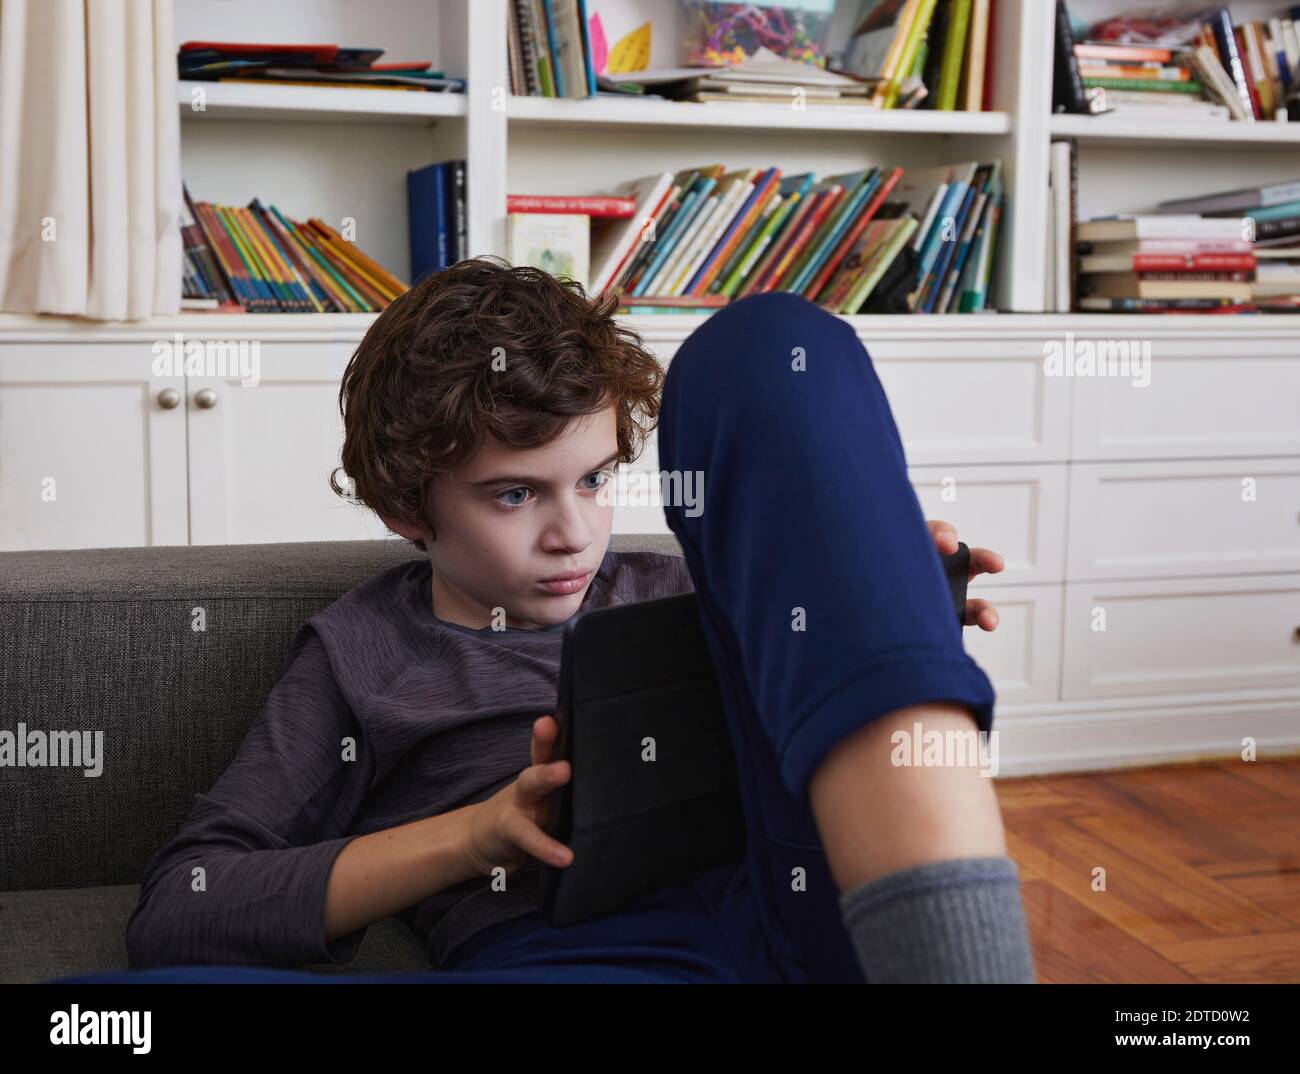 Boy (8-9) using tablet at home Stock Photo